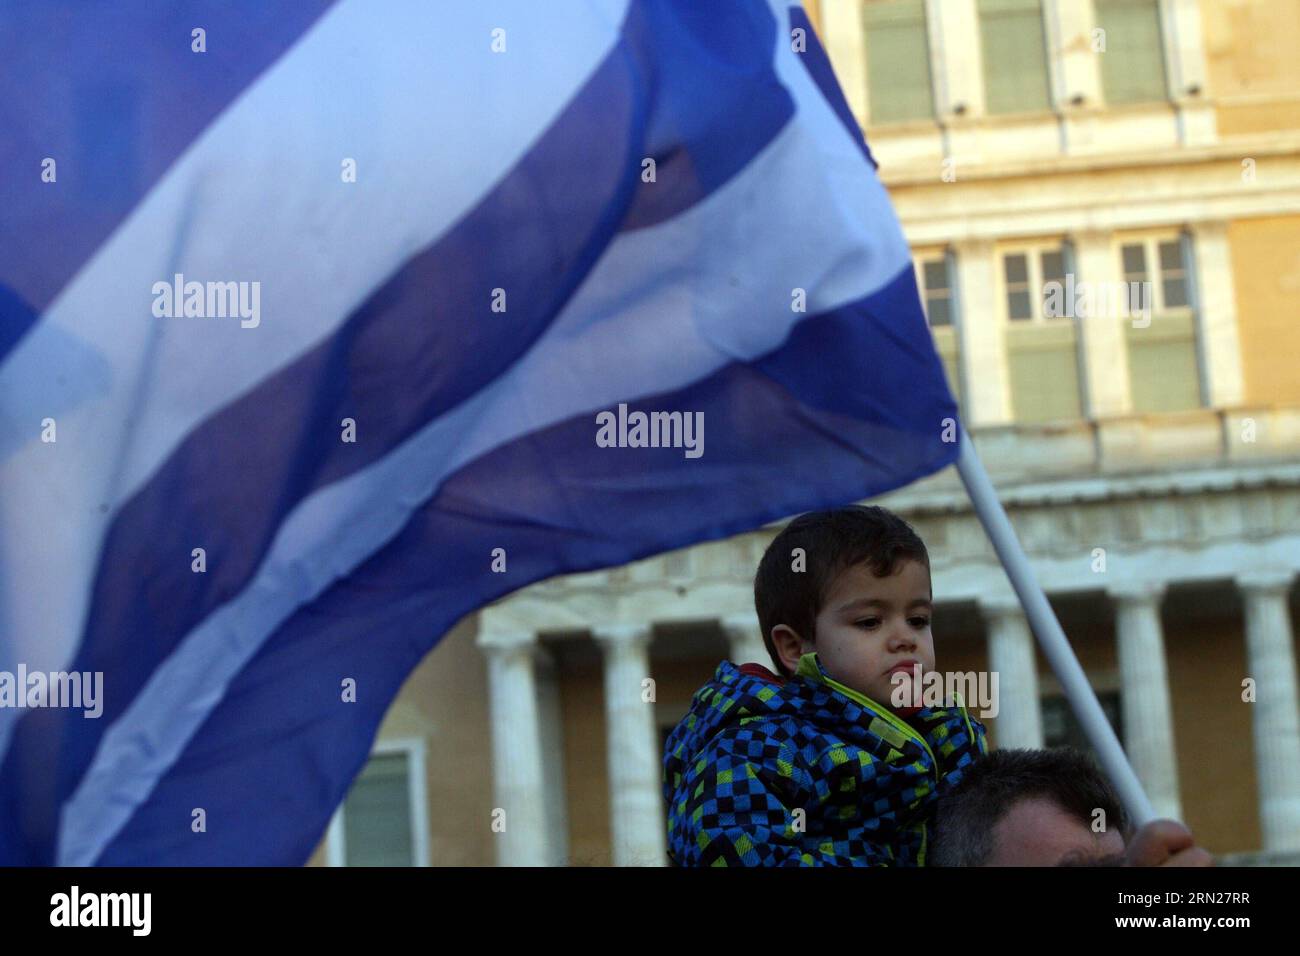 A boy attends a rally ahead of next euro group meeting on debt crisis in Athens, Greece, Feb, 15, 2015. Thousands of people gathered on Sunday in Athens and other major cities in Greece to show their support for the Greek government ahead of Monday s Eurogroup meeting on the Greek debt crisis. ) GREECE-ATHENS-POLITICS-RALLY MariosxLolos PUBLICATIONxNOTxINxCHN   a Boy Attends a Rally Ahead of Next Euro Group Meeting ON Debt Crisis in Athens Greece Feb 15 2015 thousands of Celebrities gathered ON Sunday in Athens and Other Major CITIES in Greece to Show their Support for The Greek Government Ahe Stock Photo